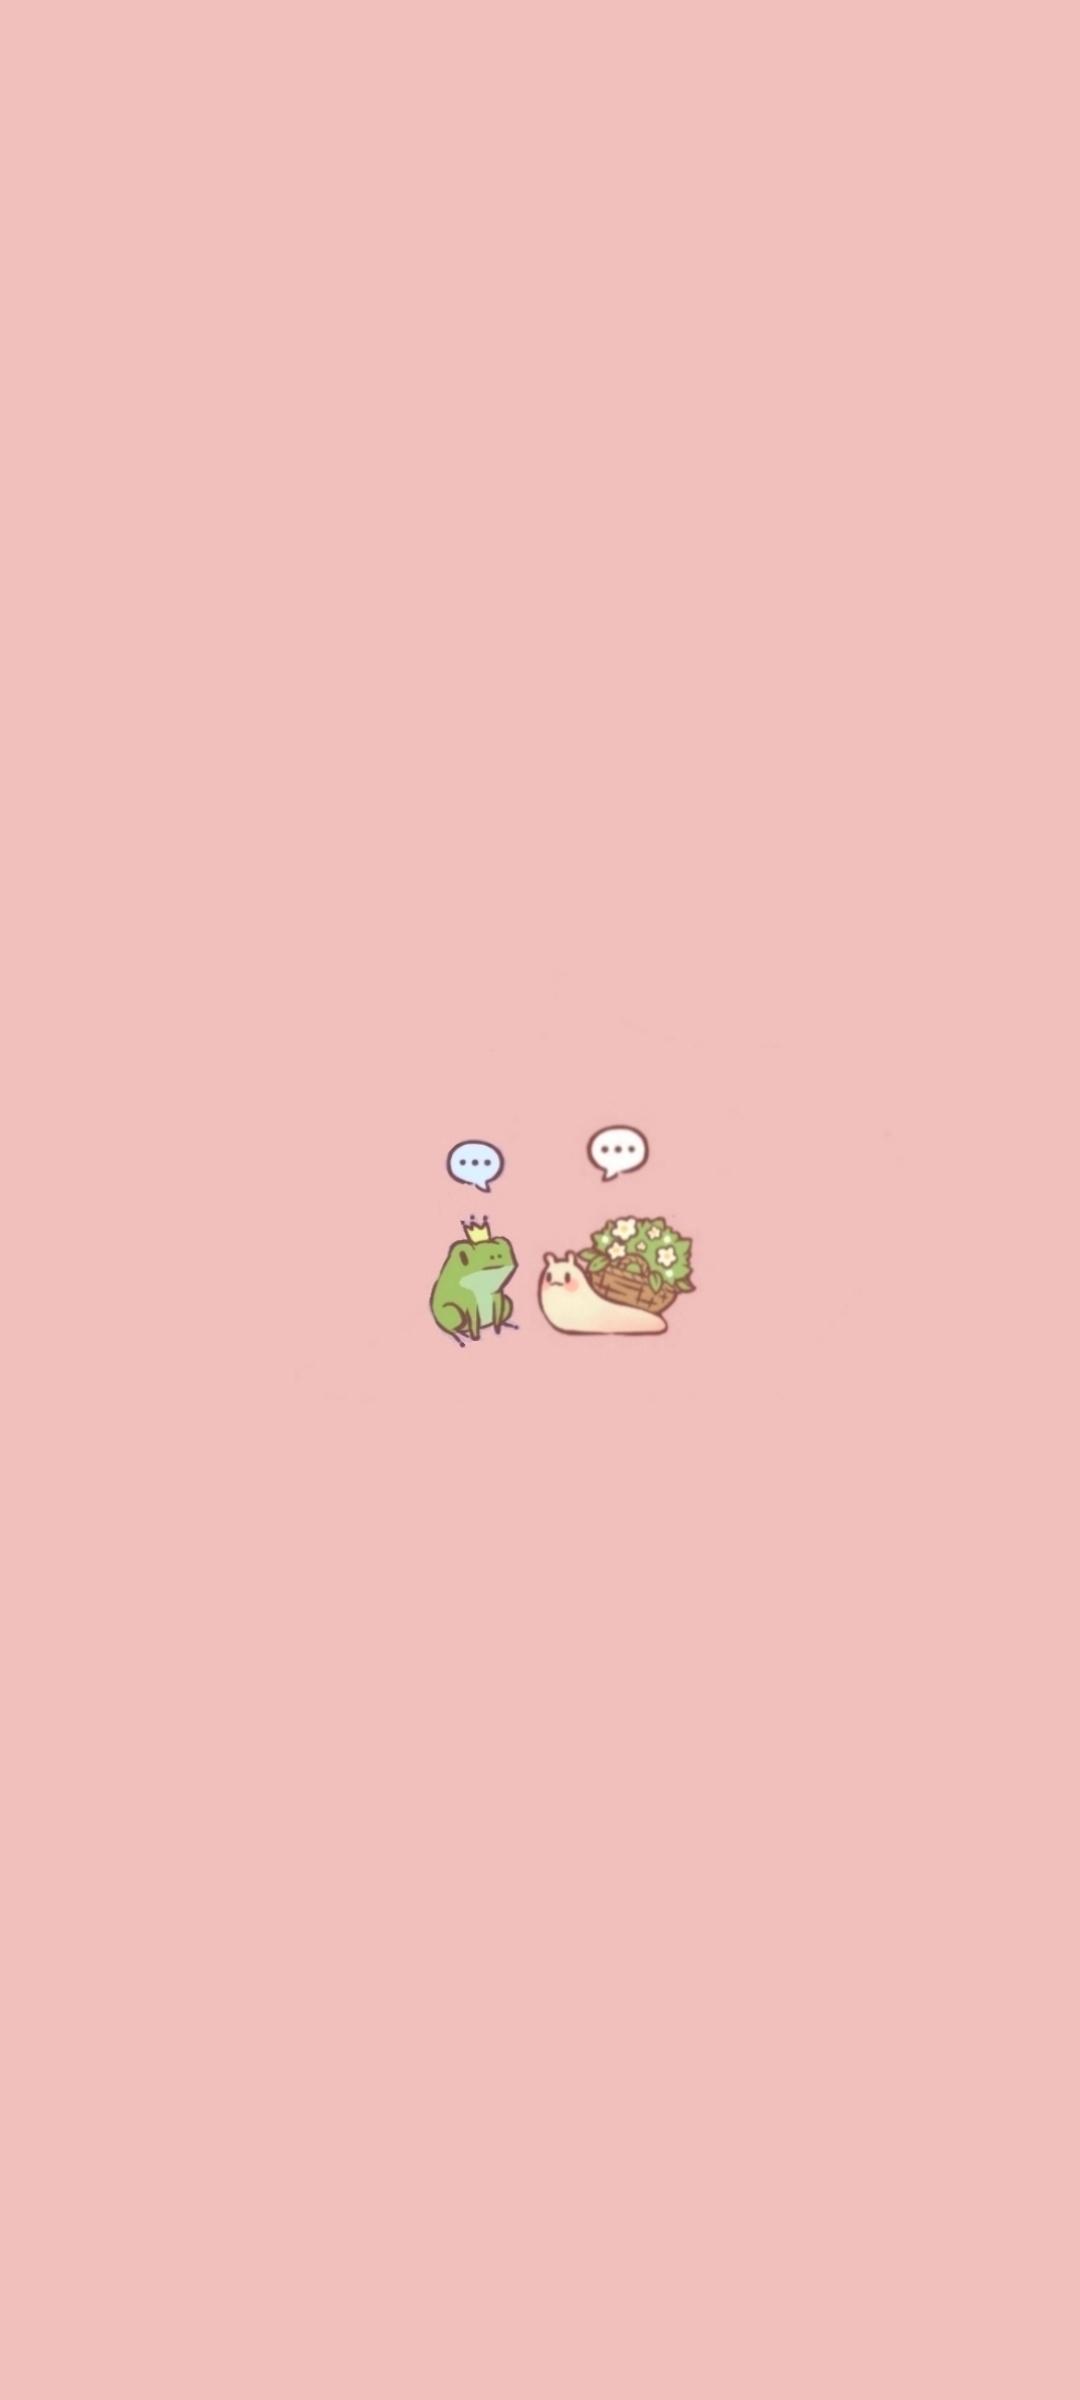 U MissyMoo79 And You Shall Receive. Here Are Some Wallpaper With The Frog Prince And Slug Sitting Side By Side. Like My Previous Post, There Are Different Options For Background Colour